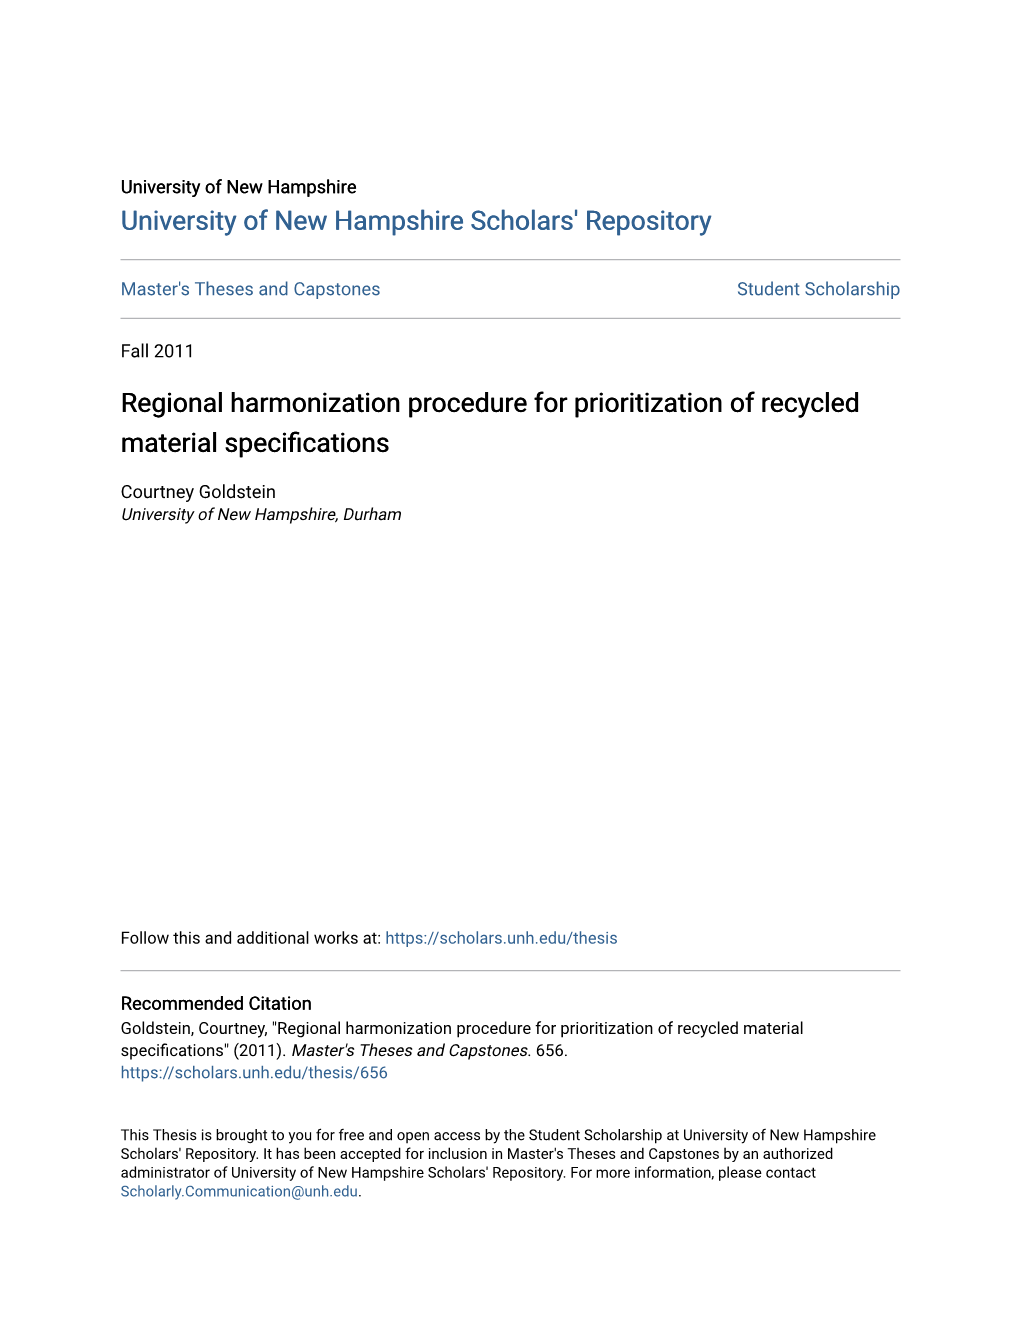 Regional Harmonization Procedure for Prioritization of Recycled Material Specifications